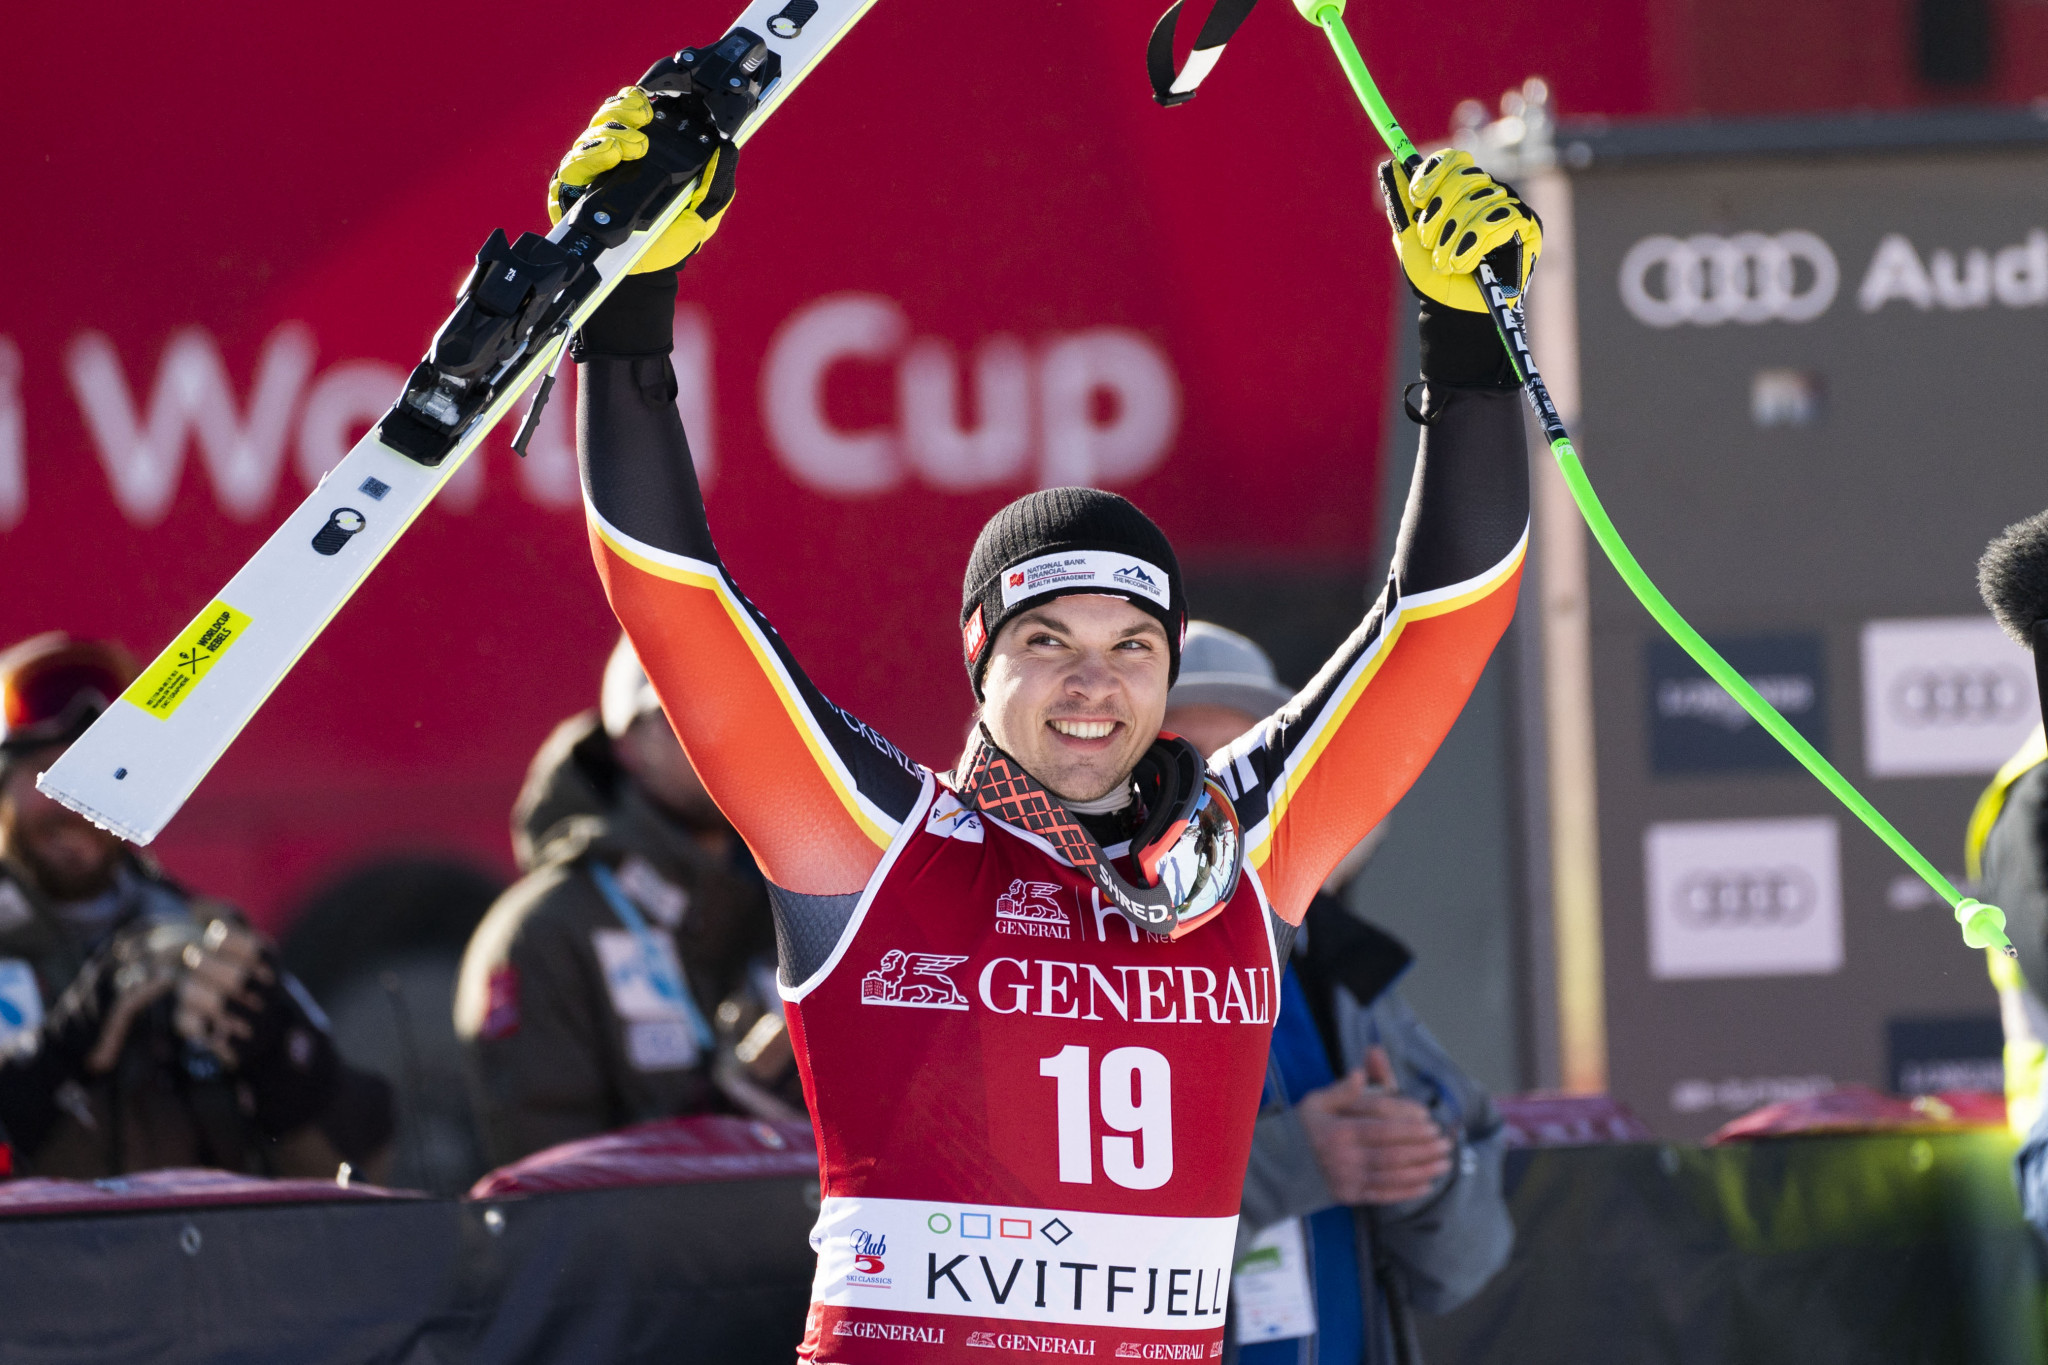 James Crawford claimed his first World Cup podium, winning the silver medal in the men's super-G ©Getty Images